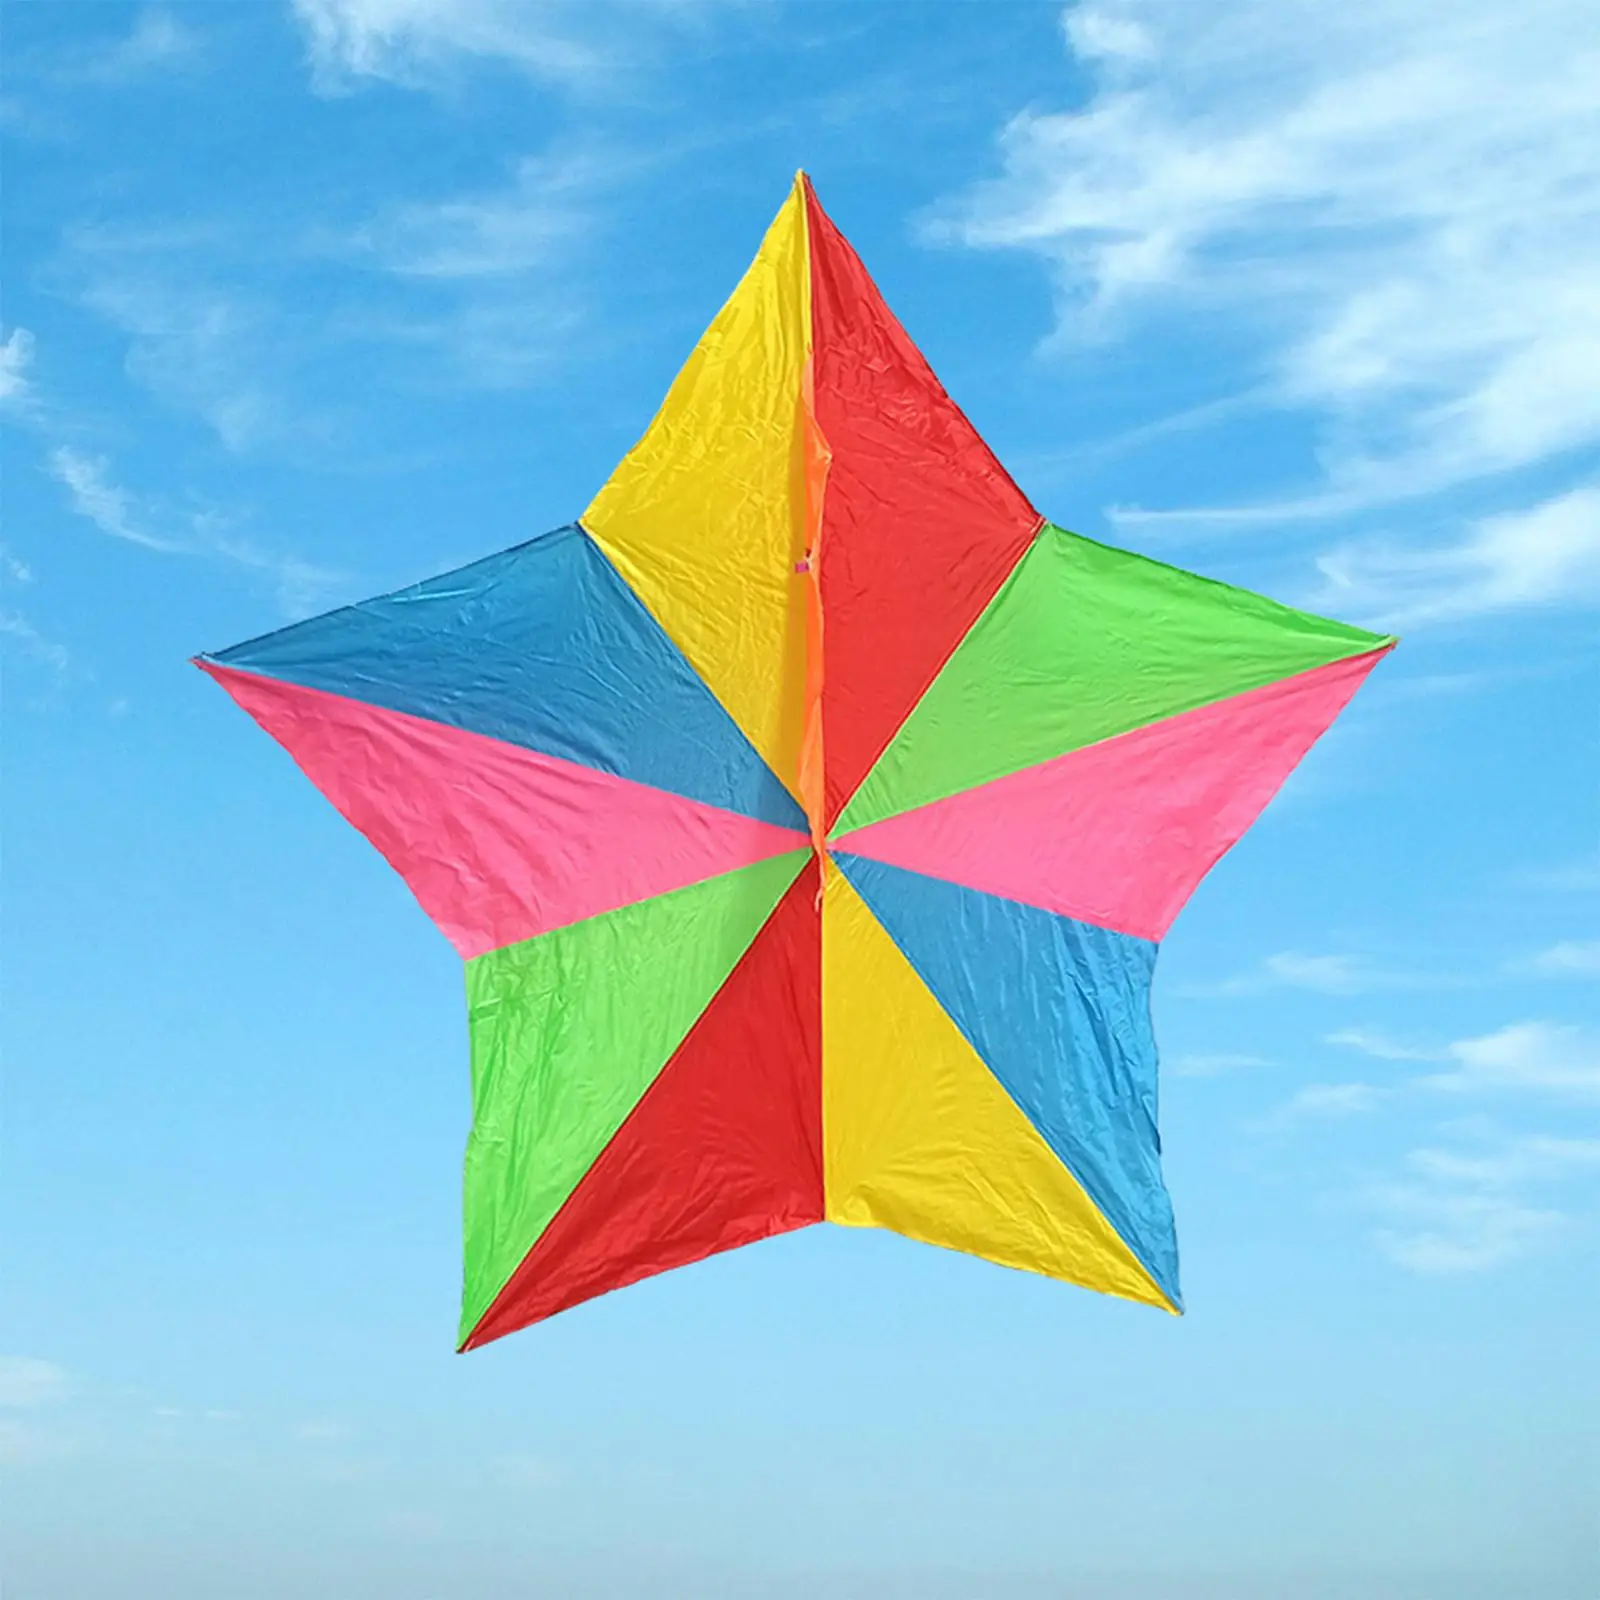 Large Five Pointed Star Kite Durable Cute Line Kite for Park Beach Lawn